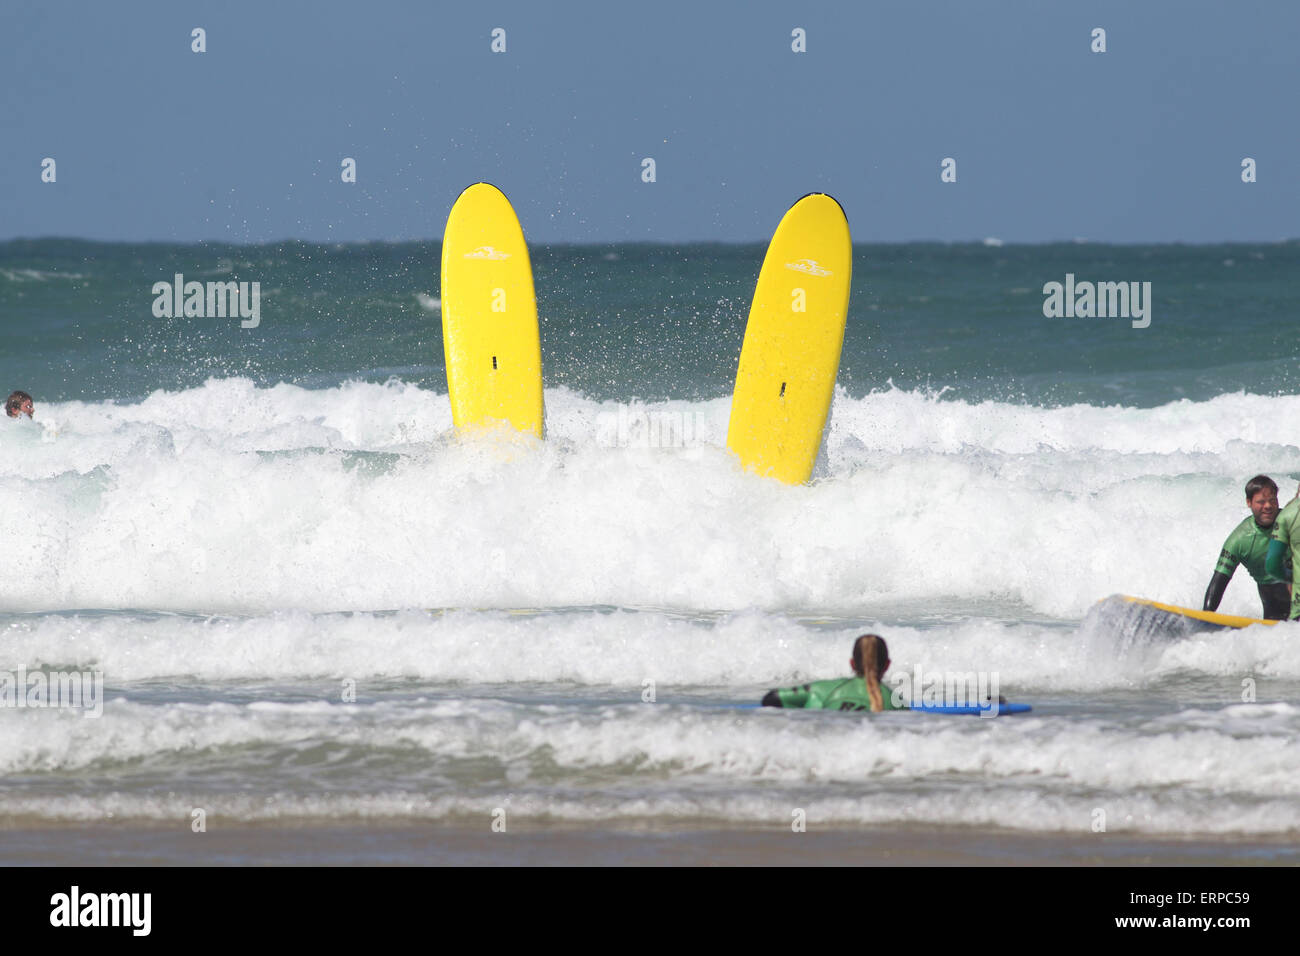 Fistral Beach, Newquay, Cornwall, UK. 6th June, 2015. A sunny Saturday brings out the surf schools in Newquay at Fistral Beach. Stock Photo